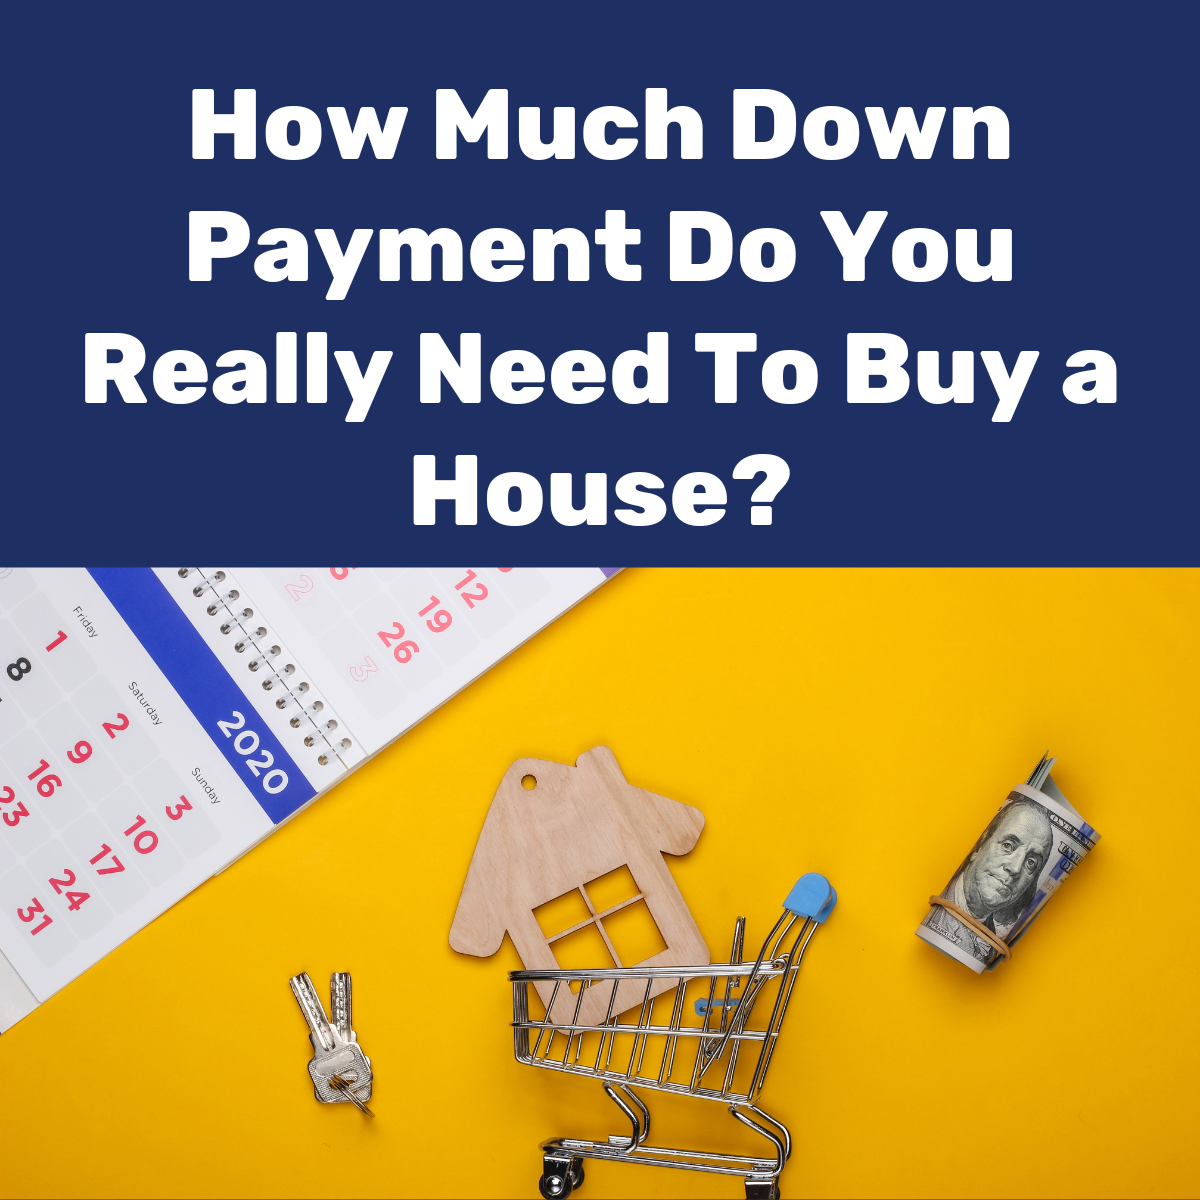 How Much Do You Really Need For A Down Payment?